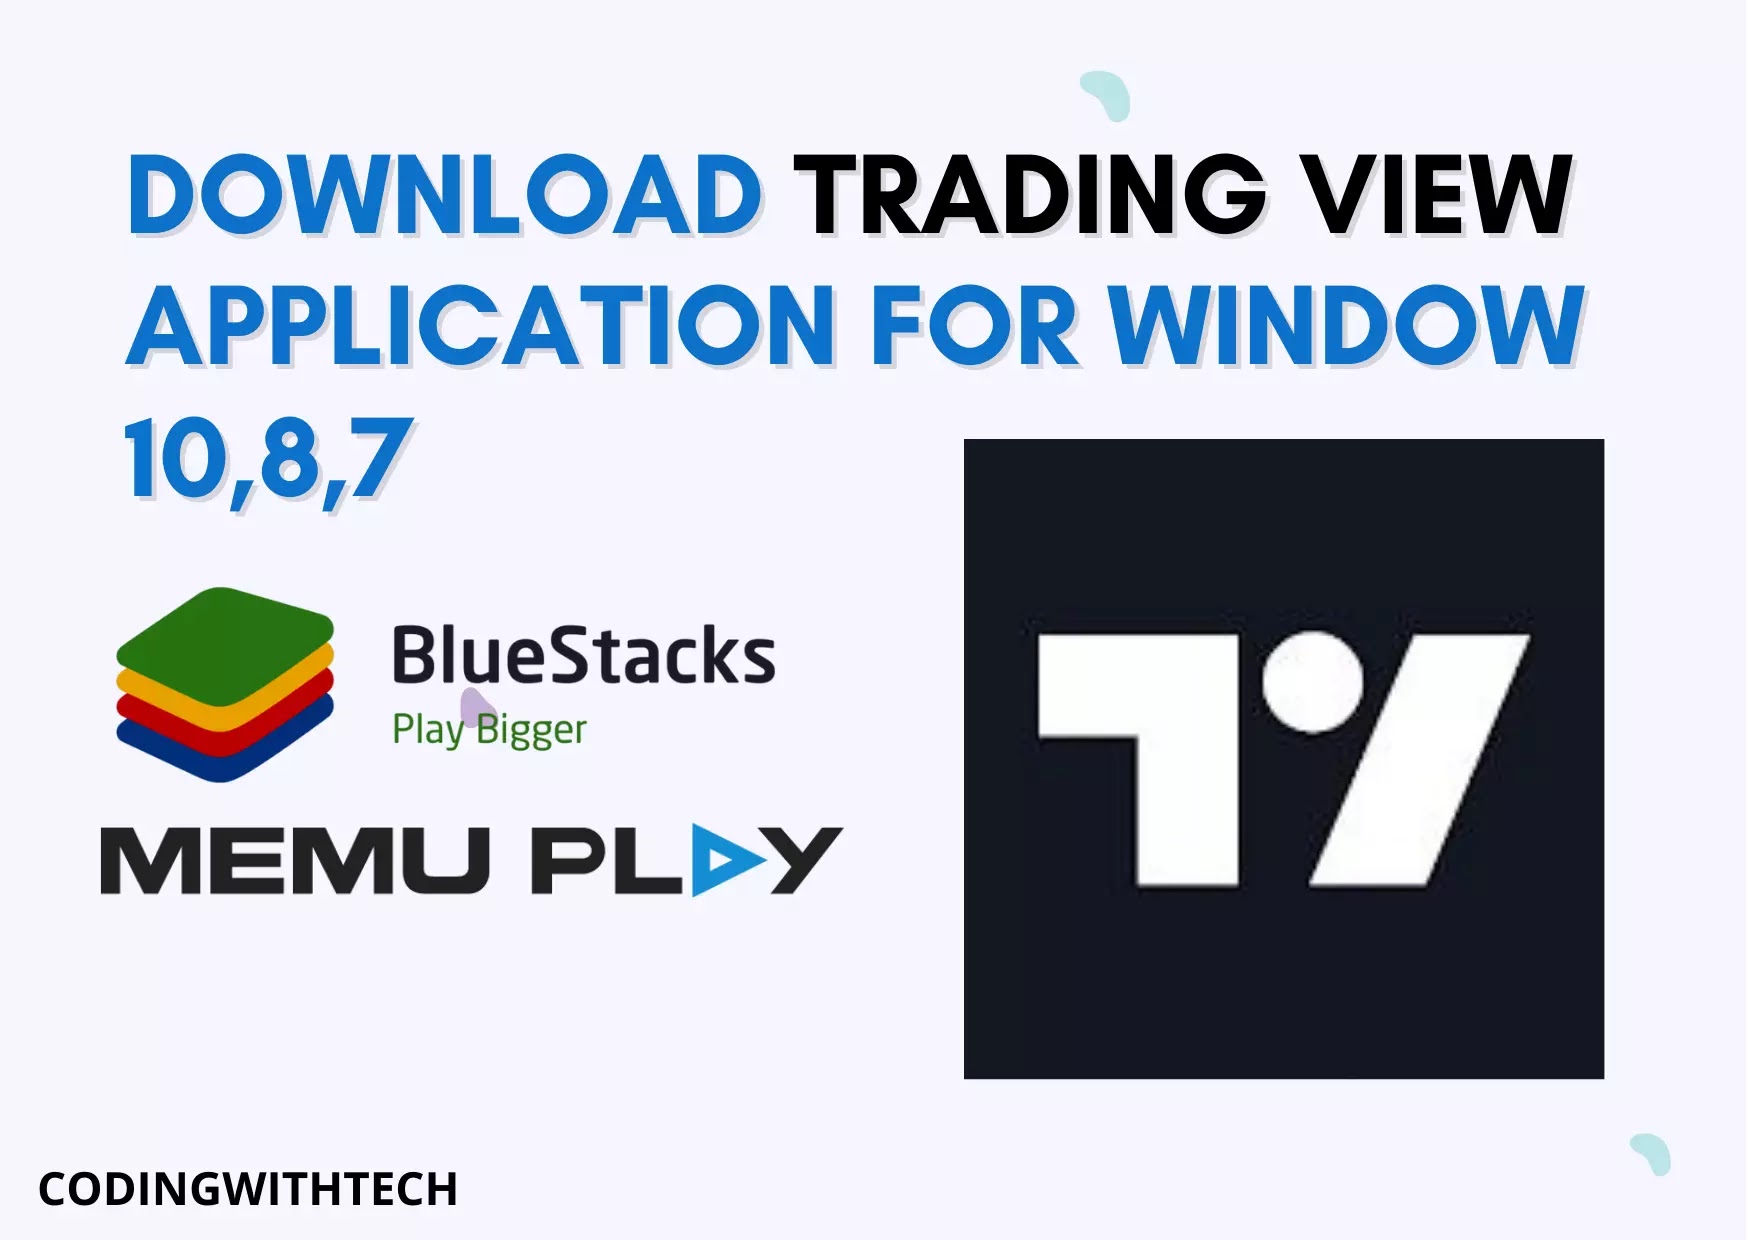 Download TradingView Application for Window 10,8,7